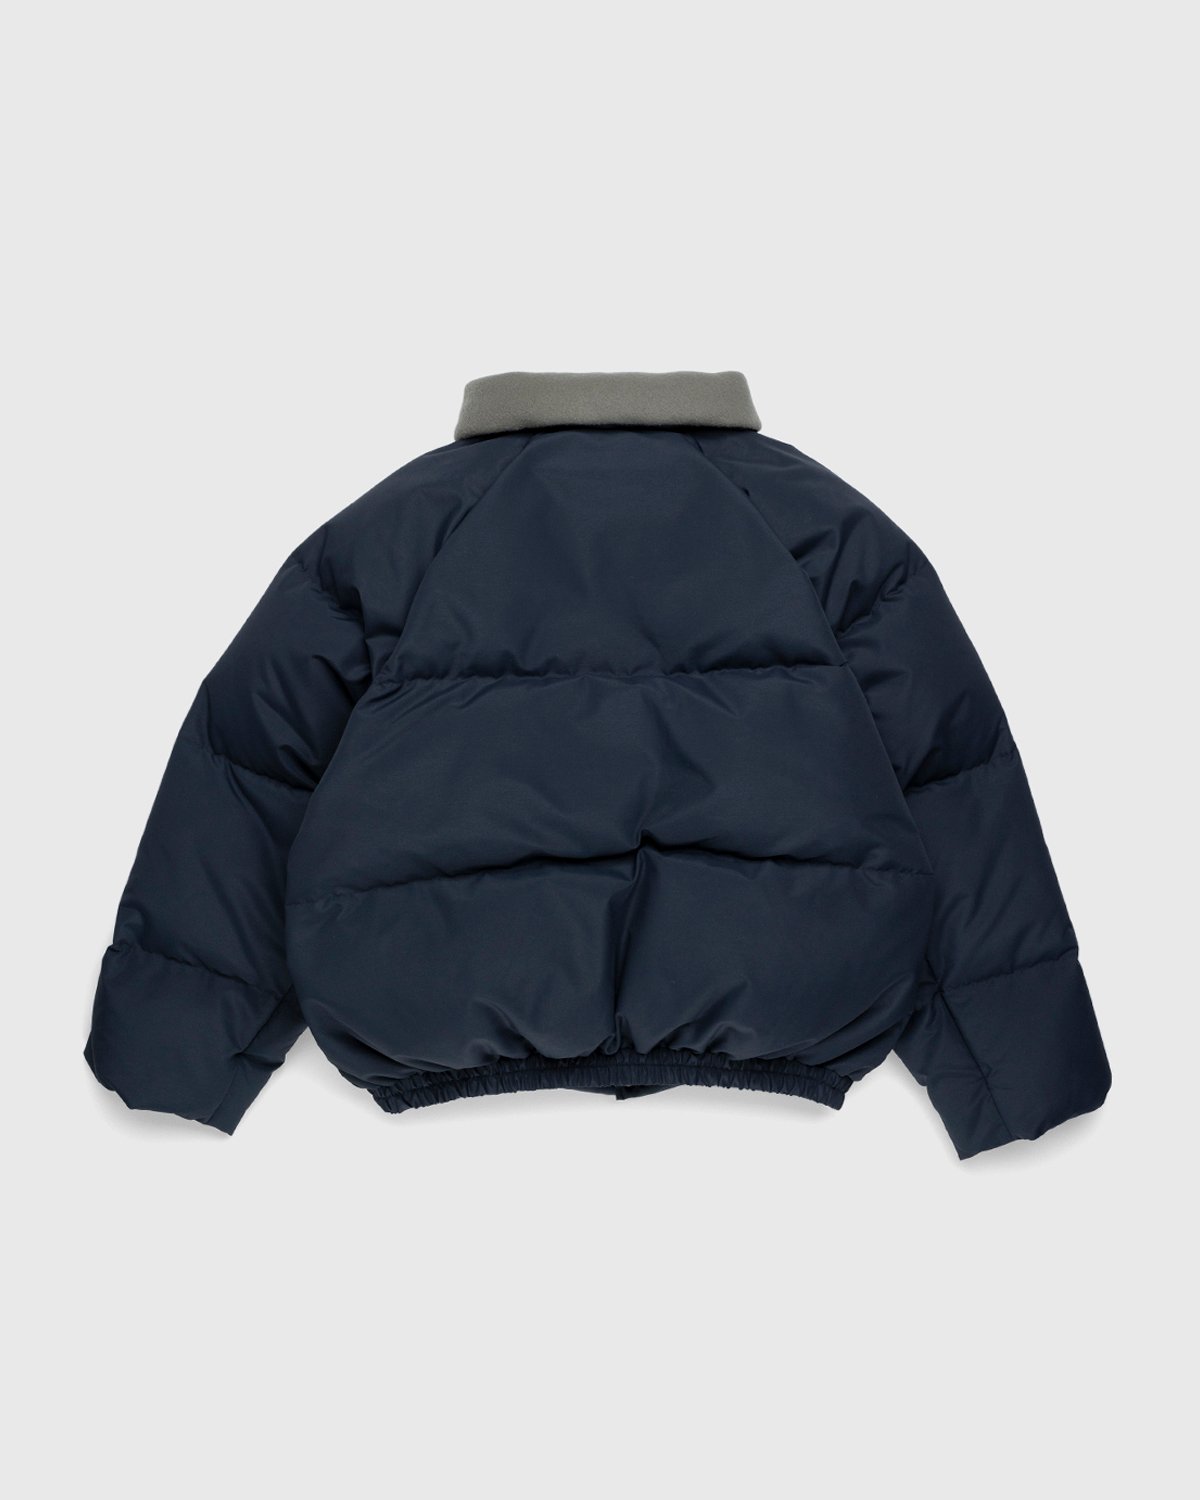 Acne Studios - Down Puffer Jacket Charcoal Grey - Clothing - Grey - Image 3